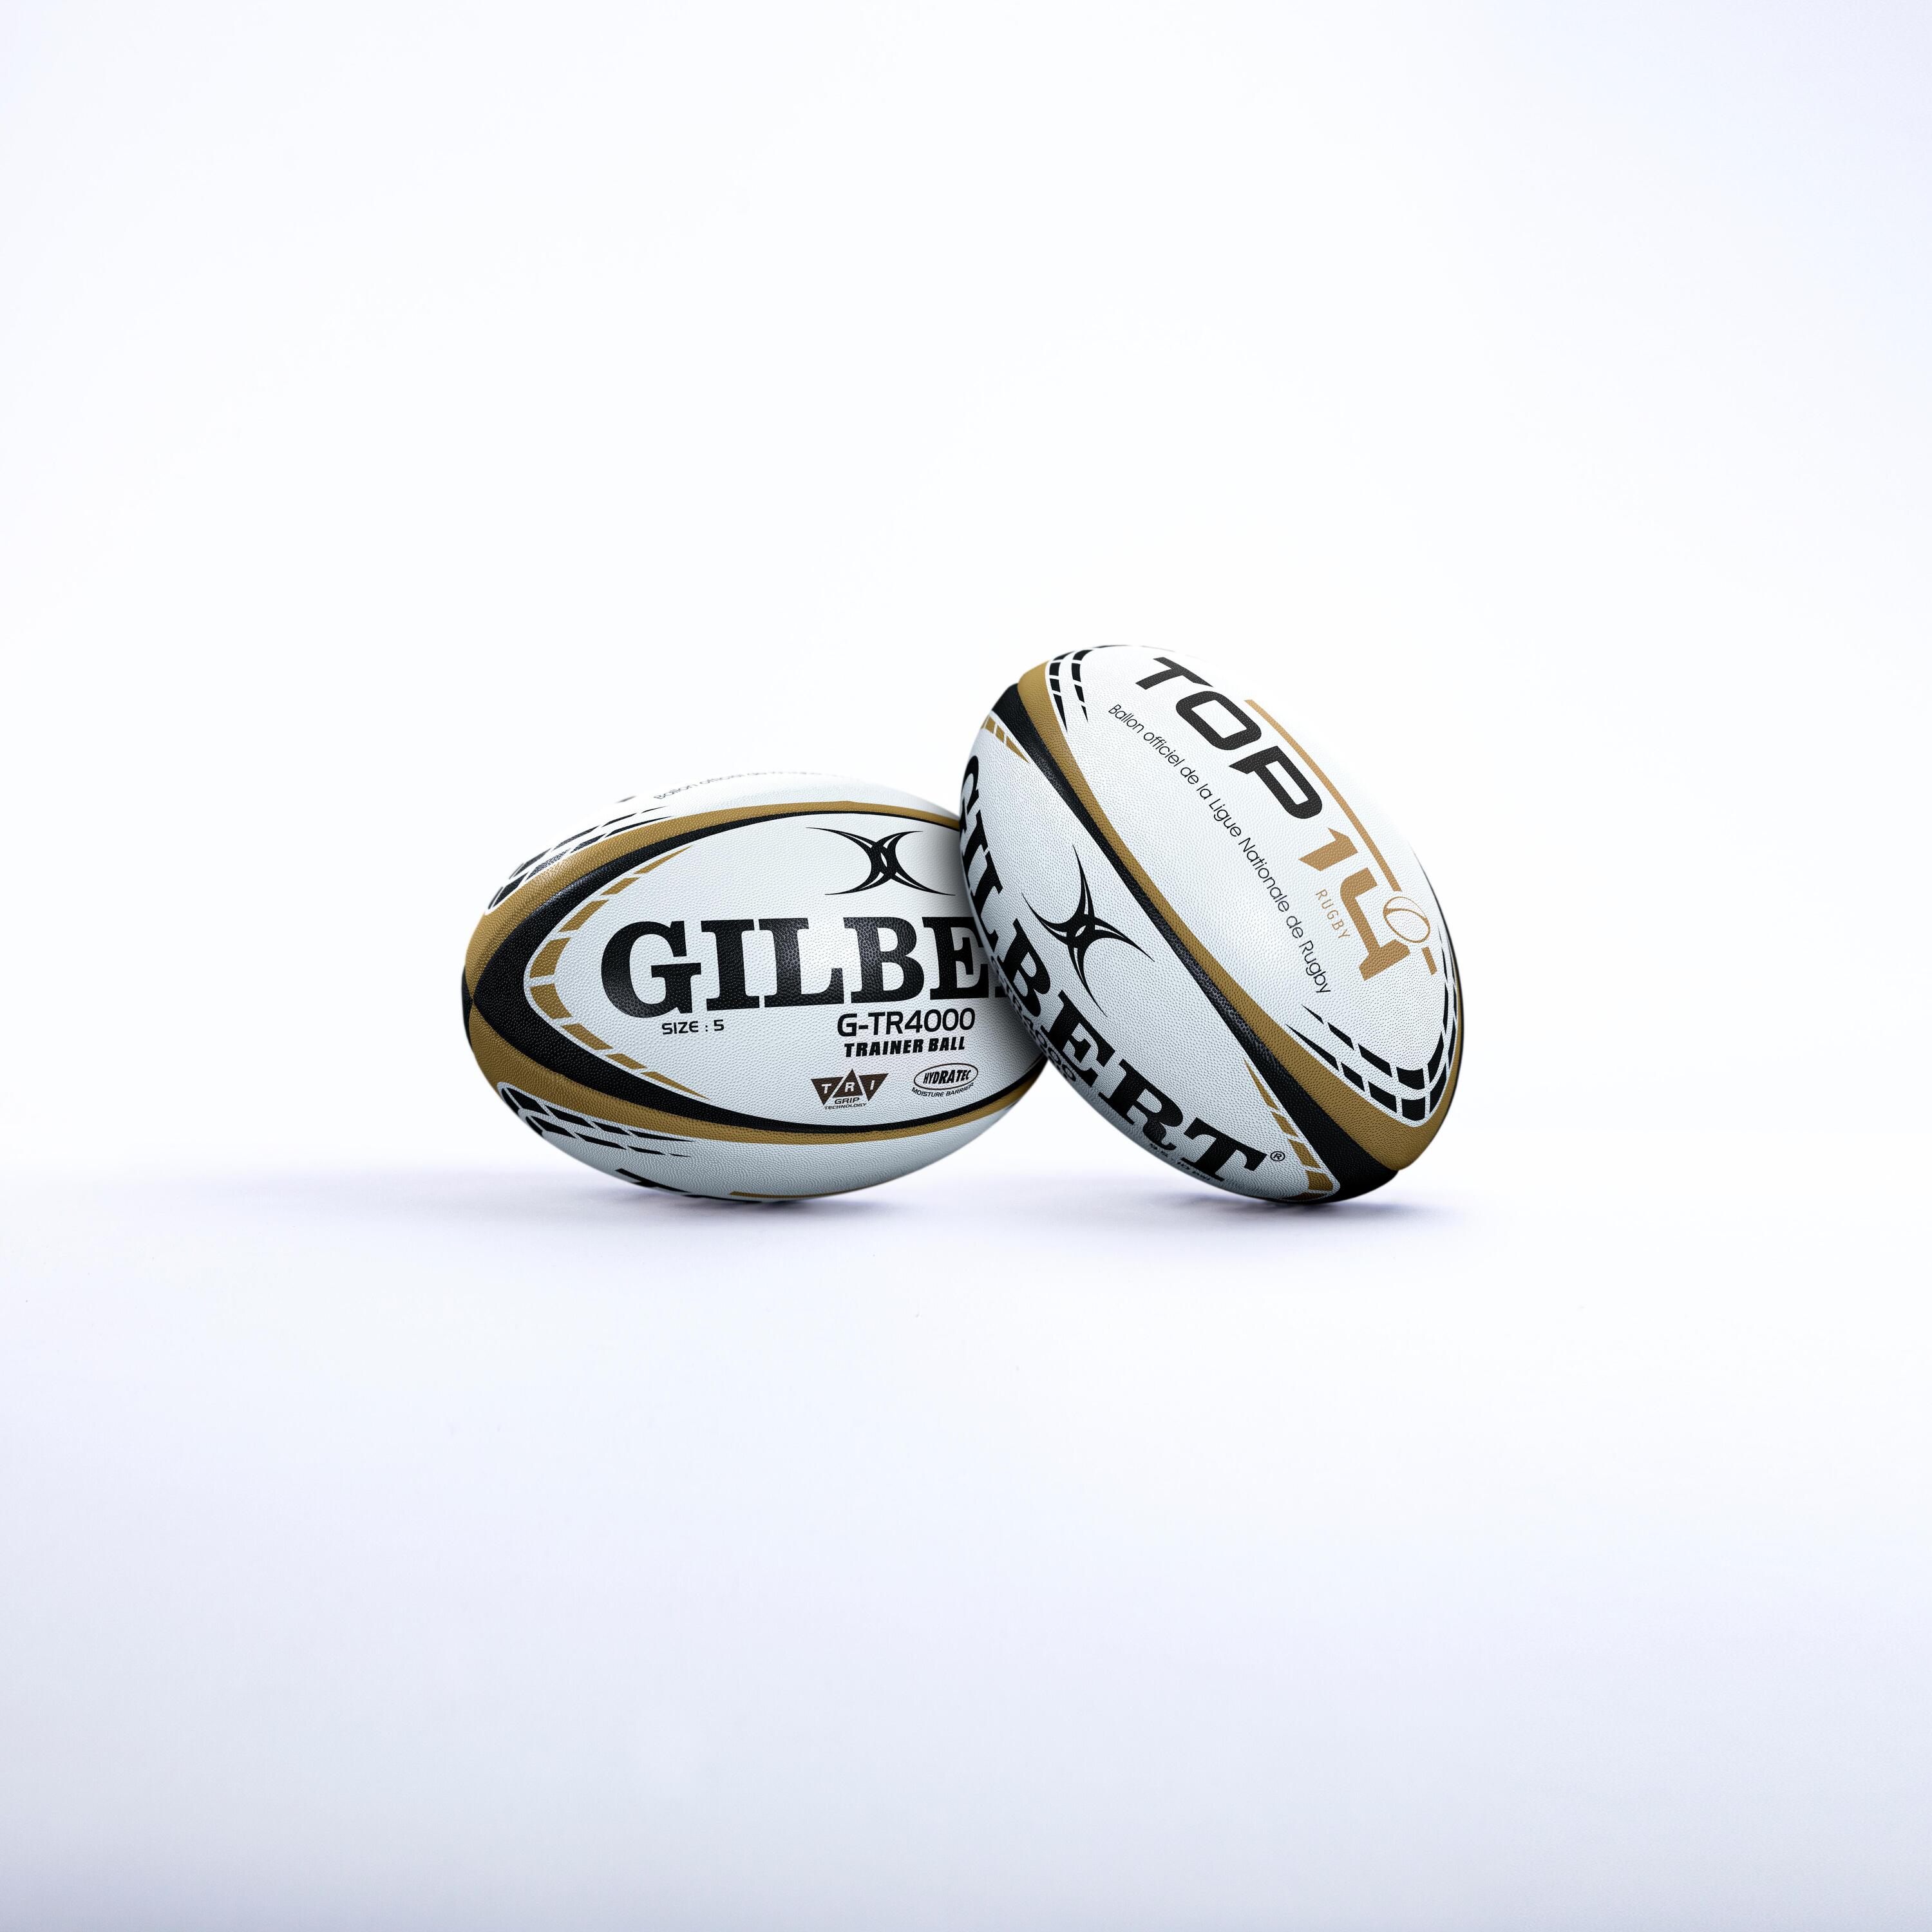 GILBERT Size 5 Rugby Ball Top 14 - Golden White